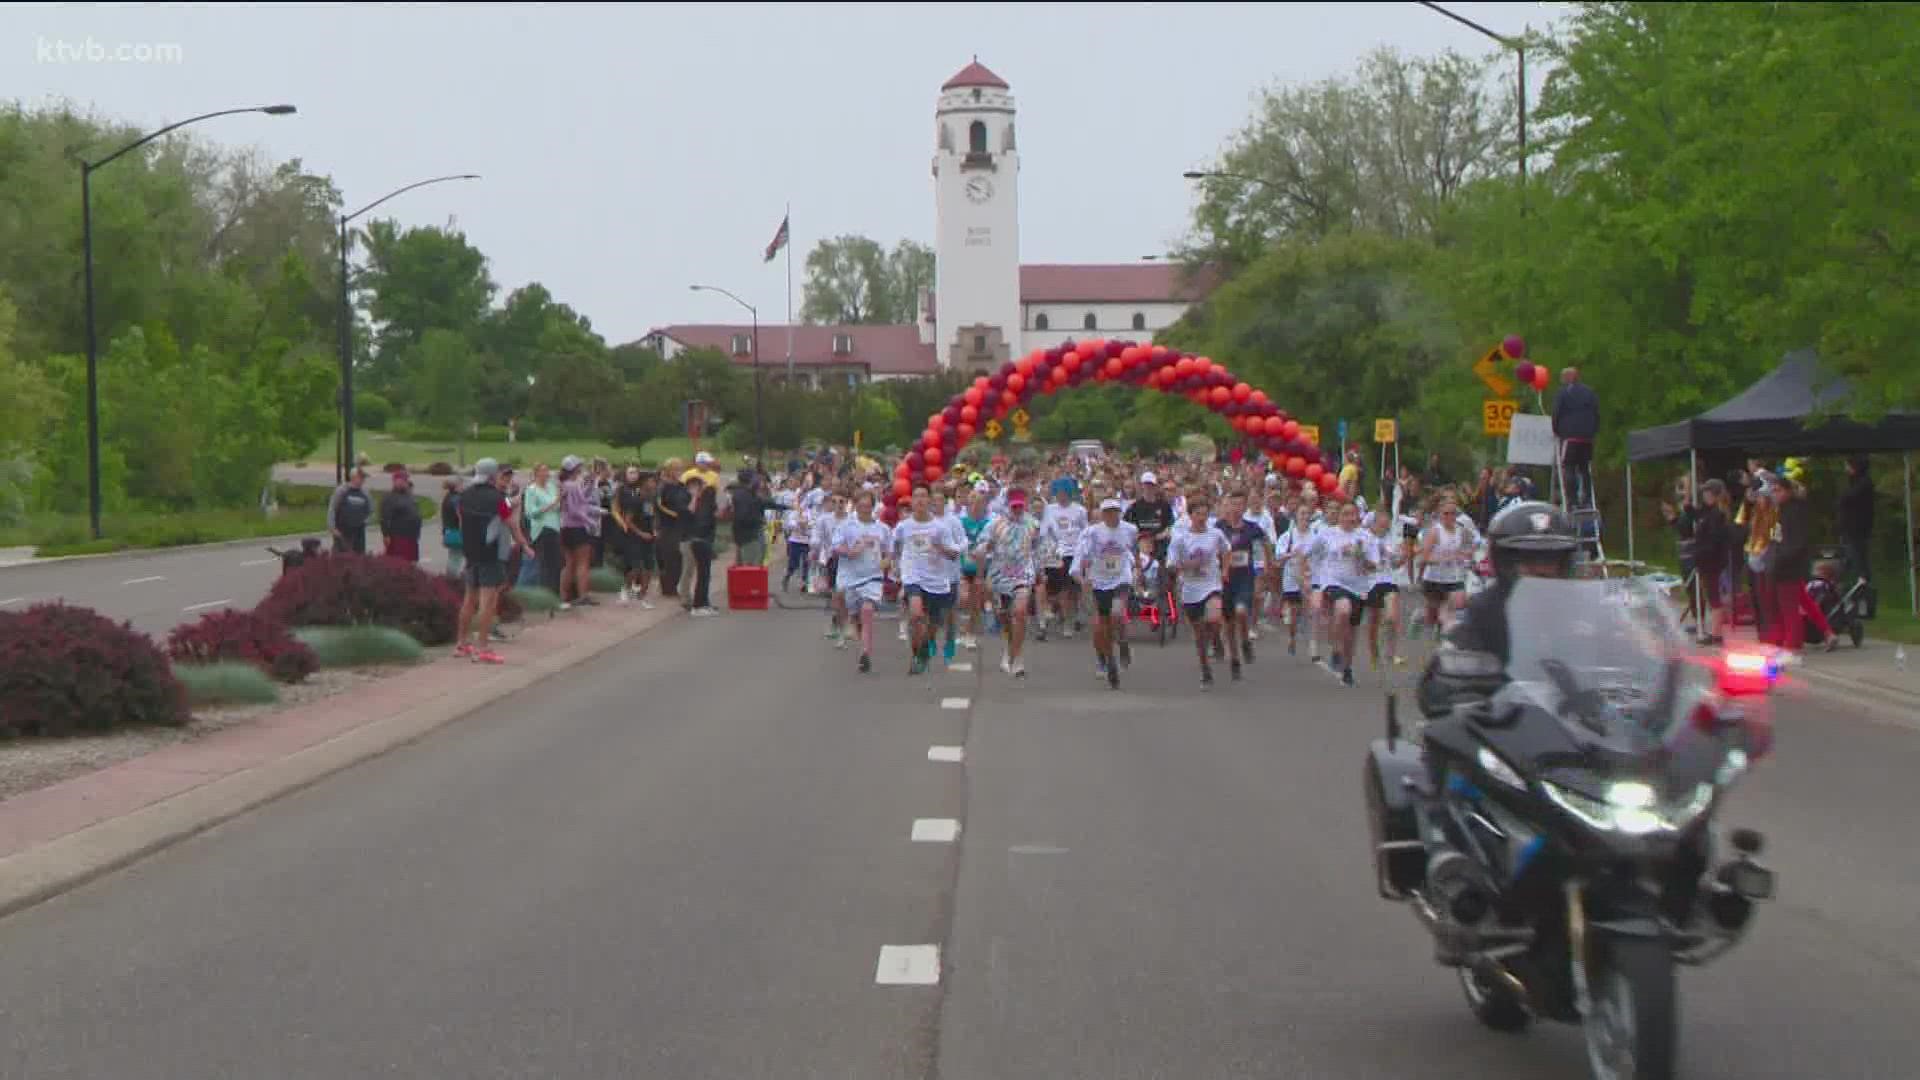 The 38th annual Capitol Classic Kids Race got underway Saturday, as more than 1,200 runners made their way from the Boise Train Depot to Cecil D. Andrus Park.